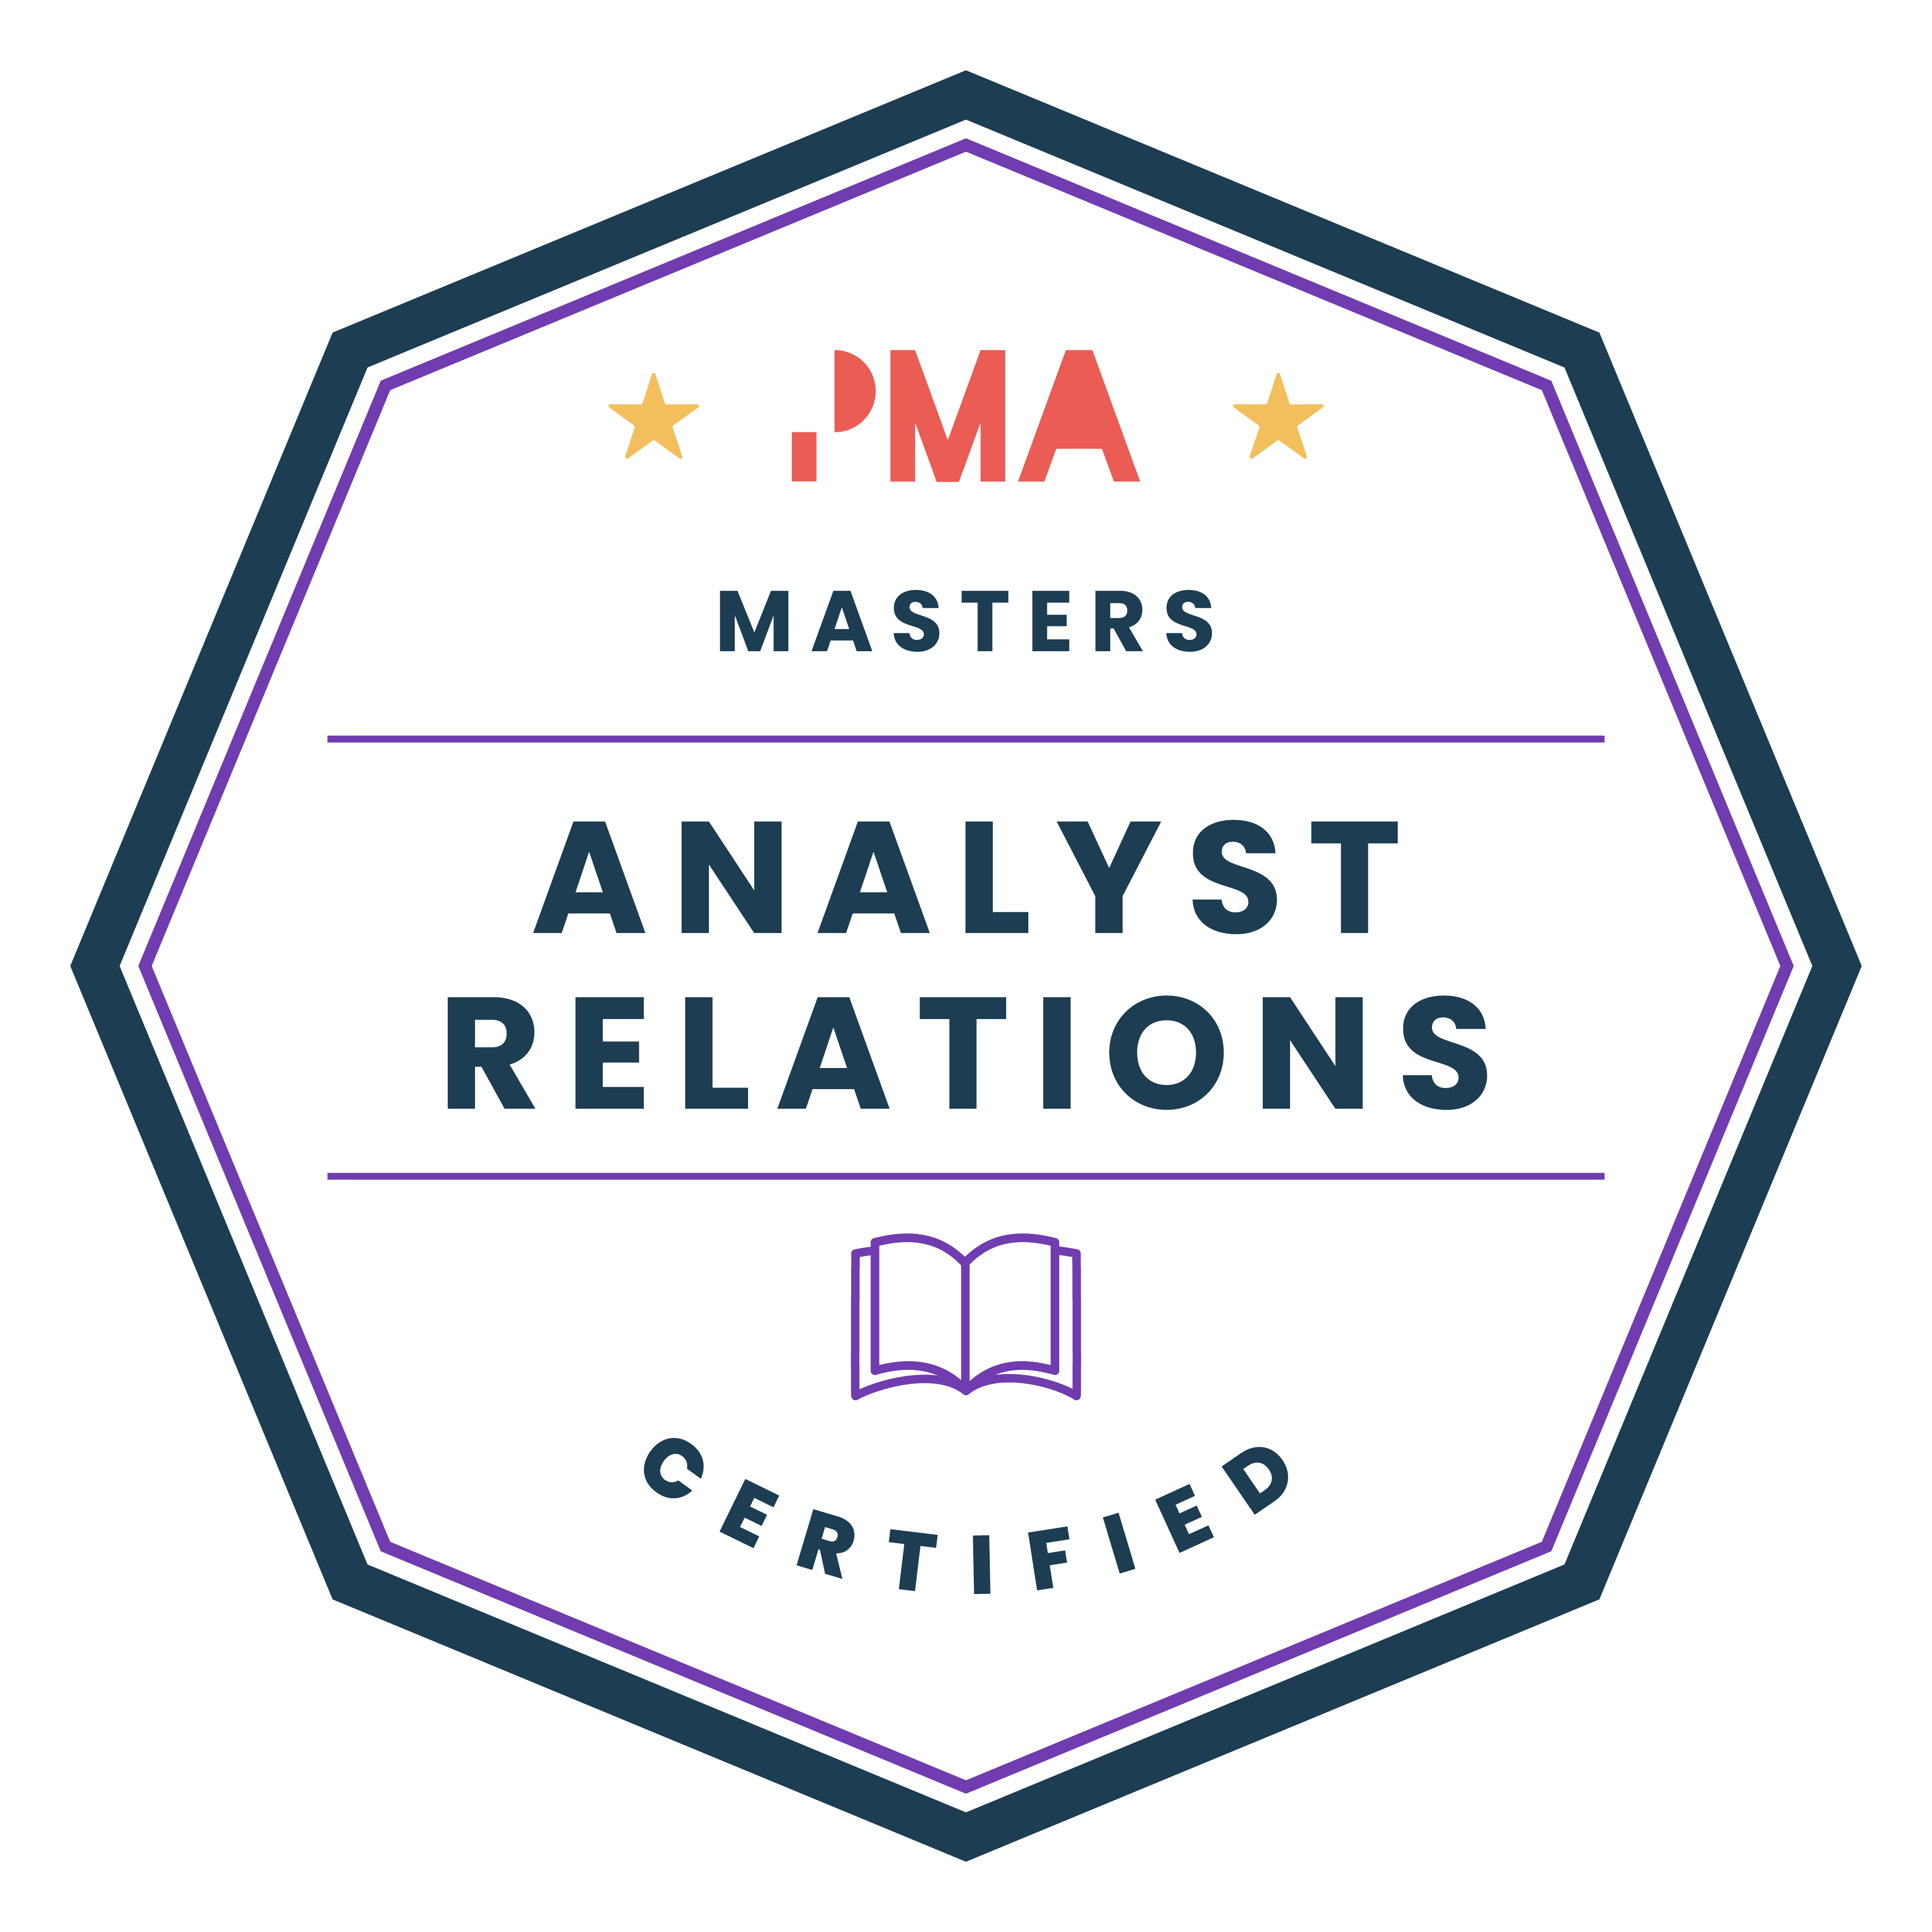 Analyst Relations Certified | Masters badge